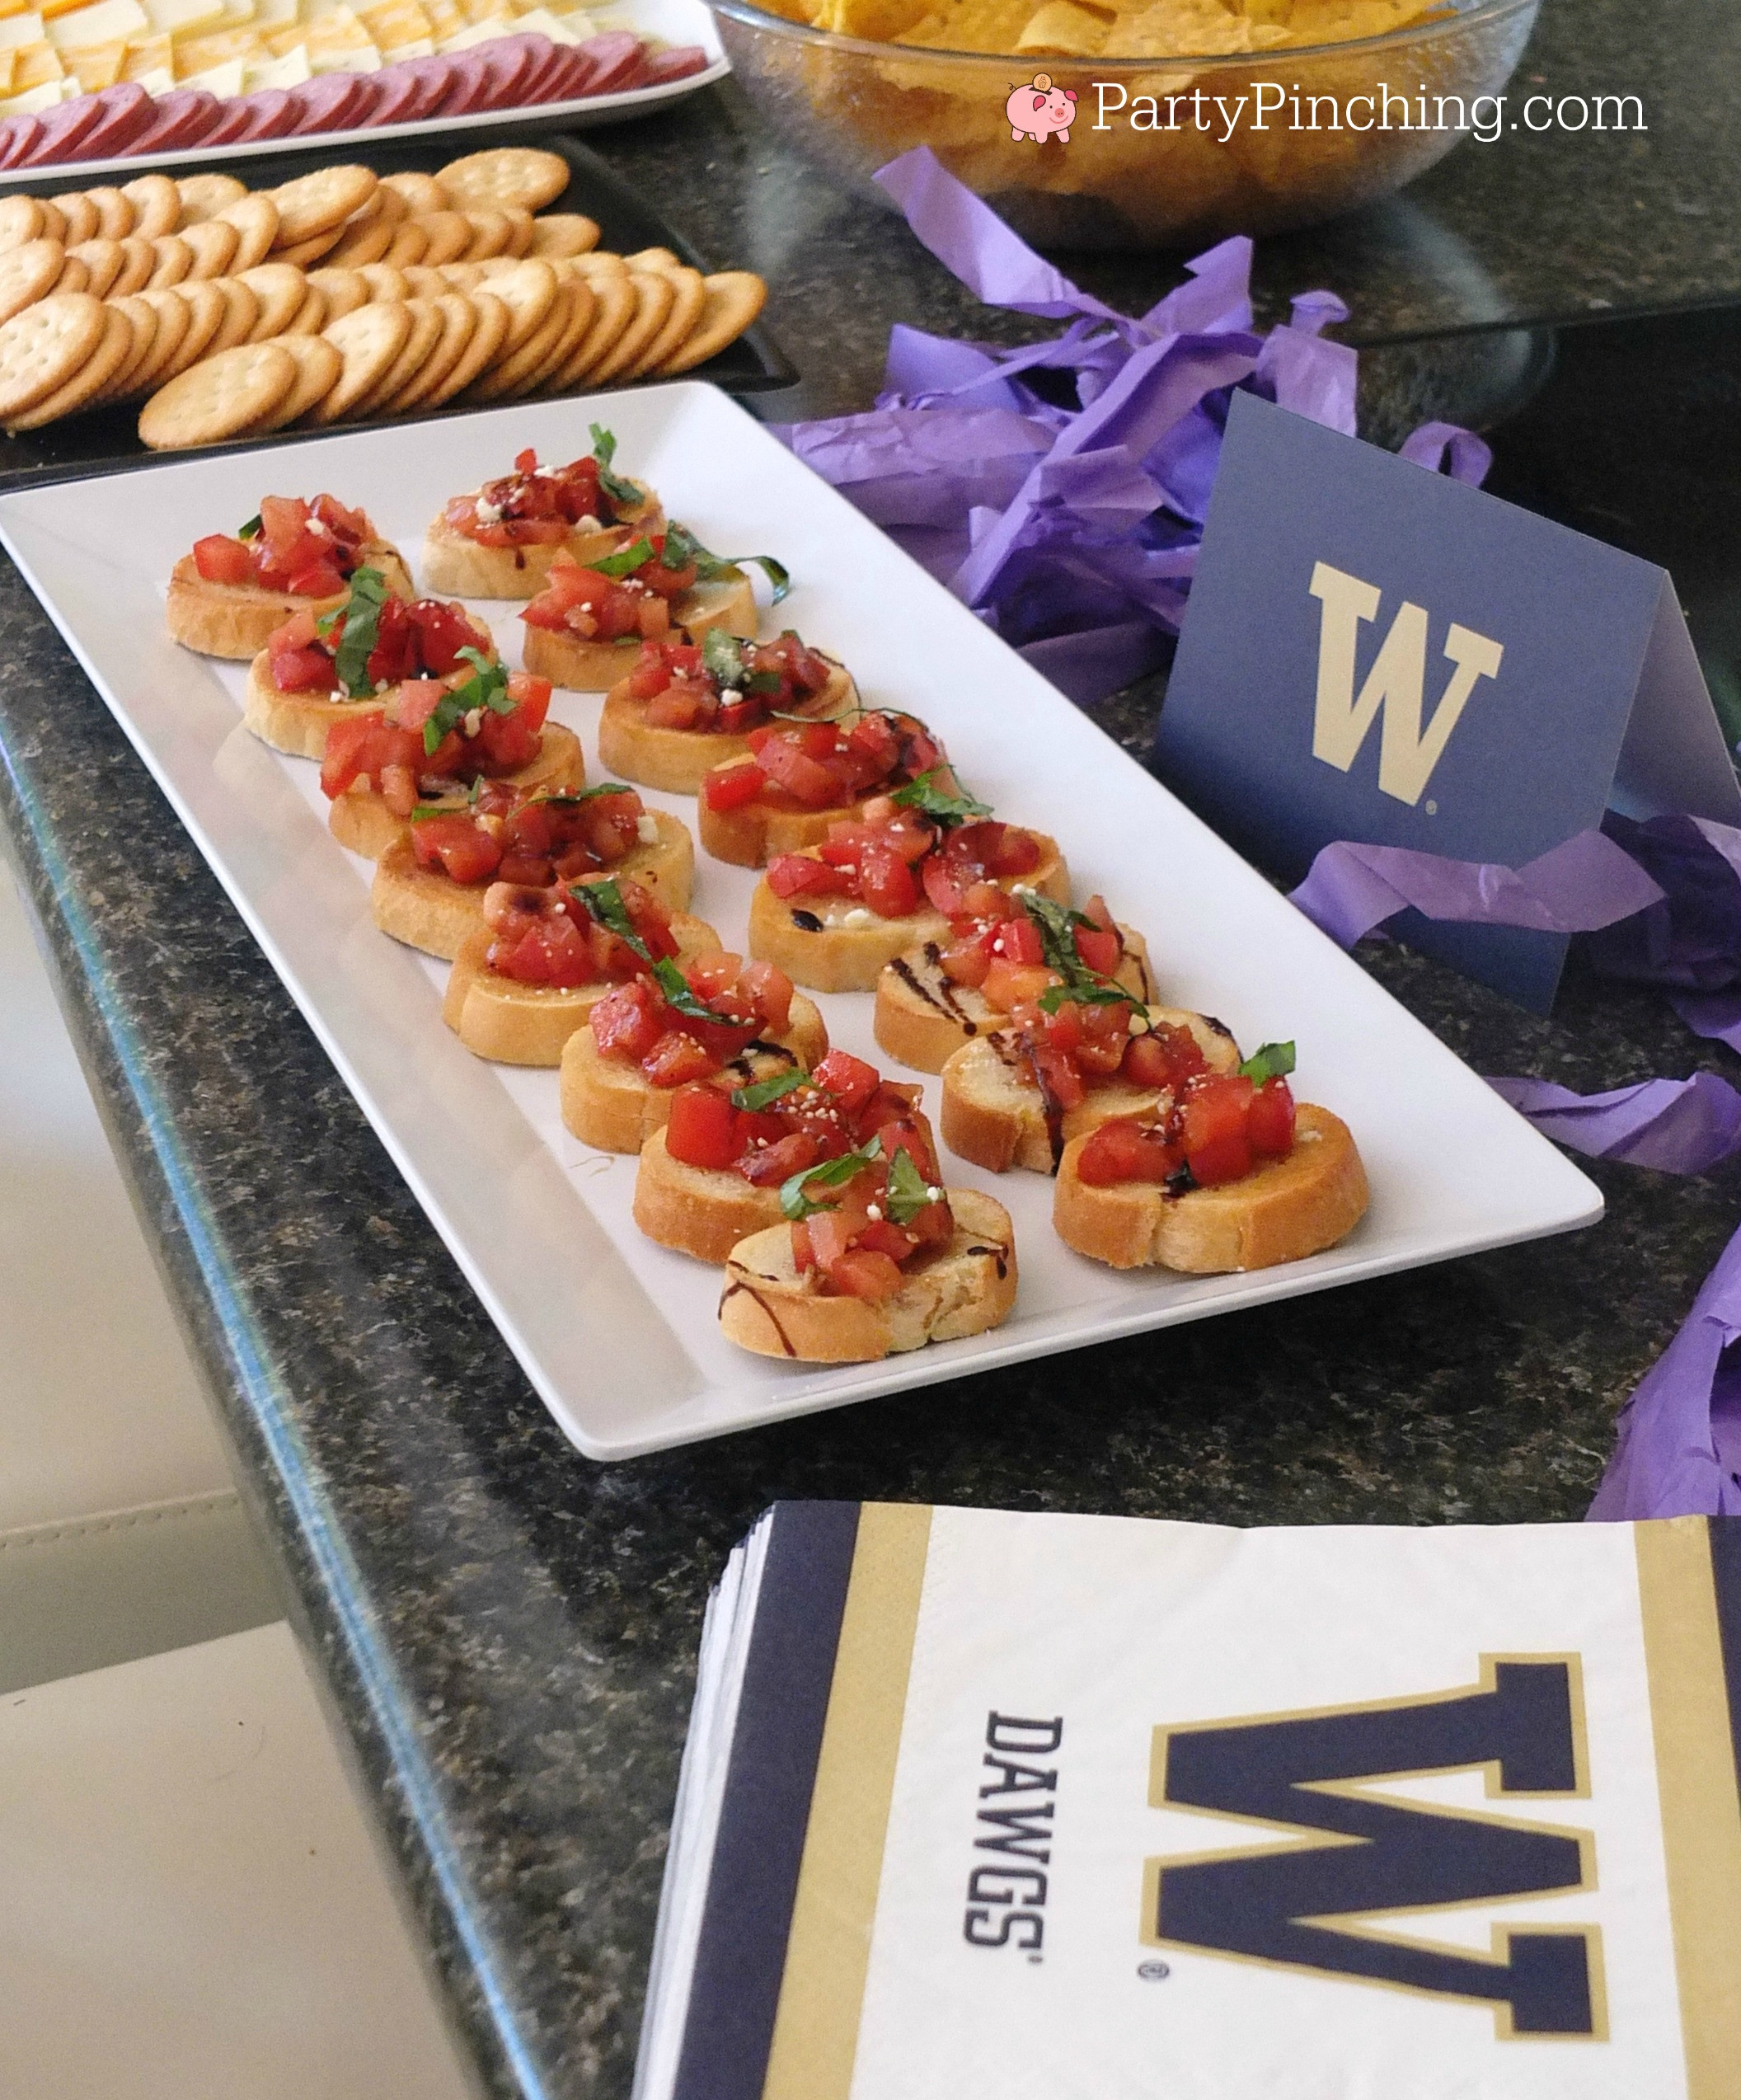 College Graduation Party Food Ideas
 College Graduation Party Graduation Party Ideas and Food